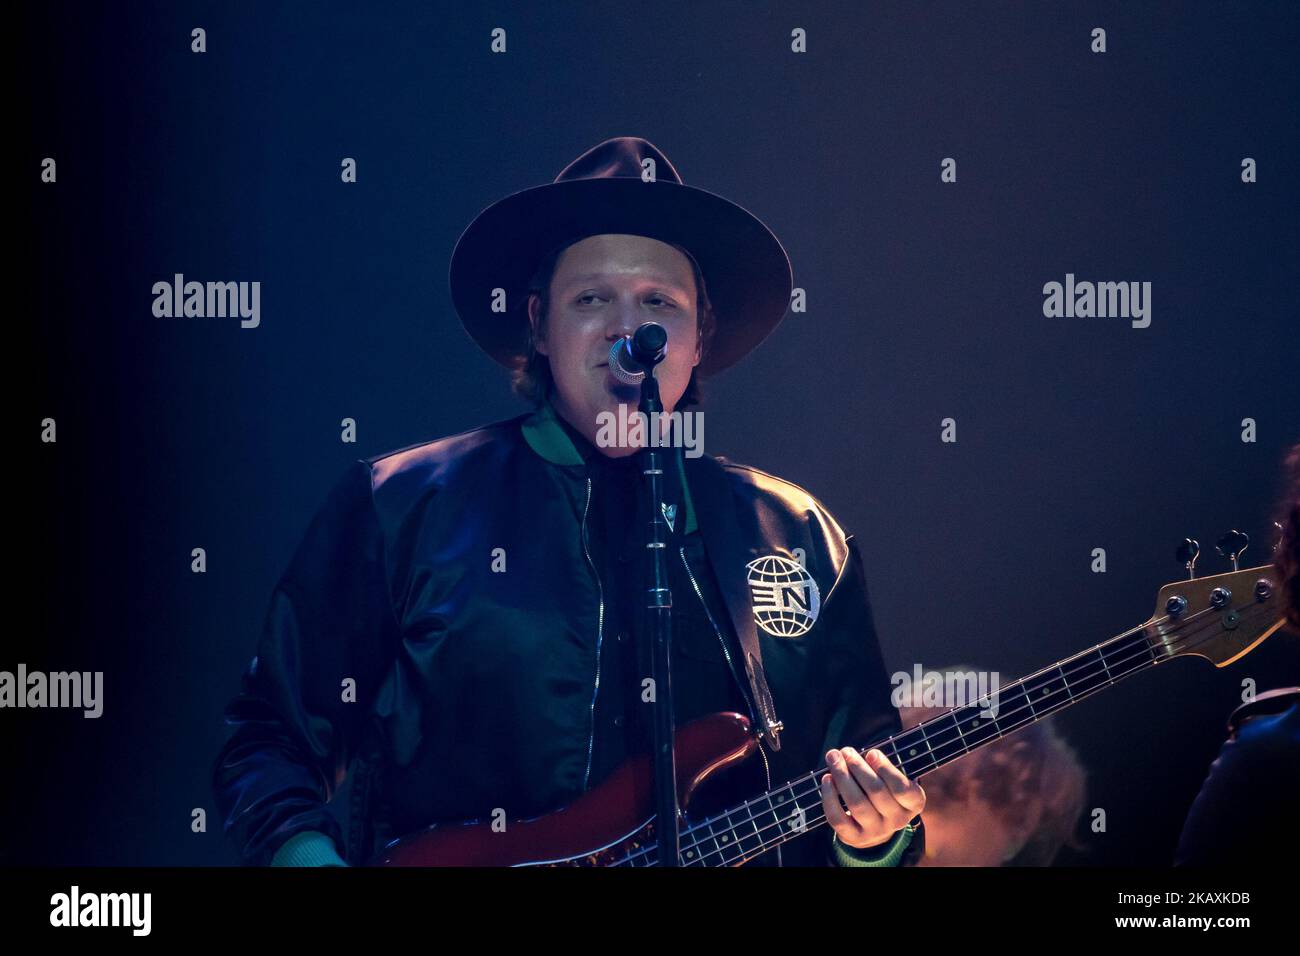 Win Butler of Canadian indie rock band Arcade FIre is pictured on atage as they perform at Arena Wembley, London on April 12, 2018. Arcade Fire is a Canadian indie rock band, consisting of husband and wife Win Butler (vocals, bass, guitar) and Régine Chassagne, along with Win's younger brother William Butler, Richard Reed Parry, Tim Kingsbury and Jeremy Gara. The band's current touring line-up also includes former core member Sarah Neufeld, percussionist Tiwill Duprate and saxophonist Stuart Bogie. (Photo by Alberto Pezzali/NurPhoto) Stock Photo